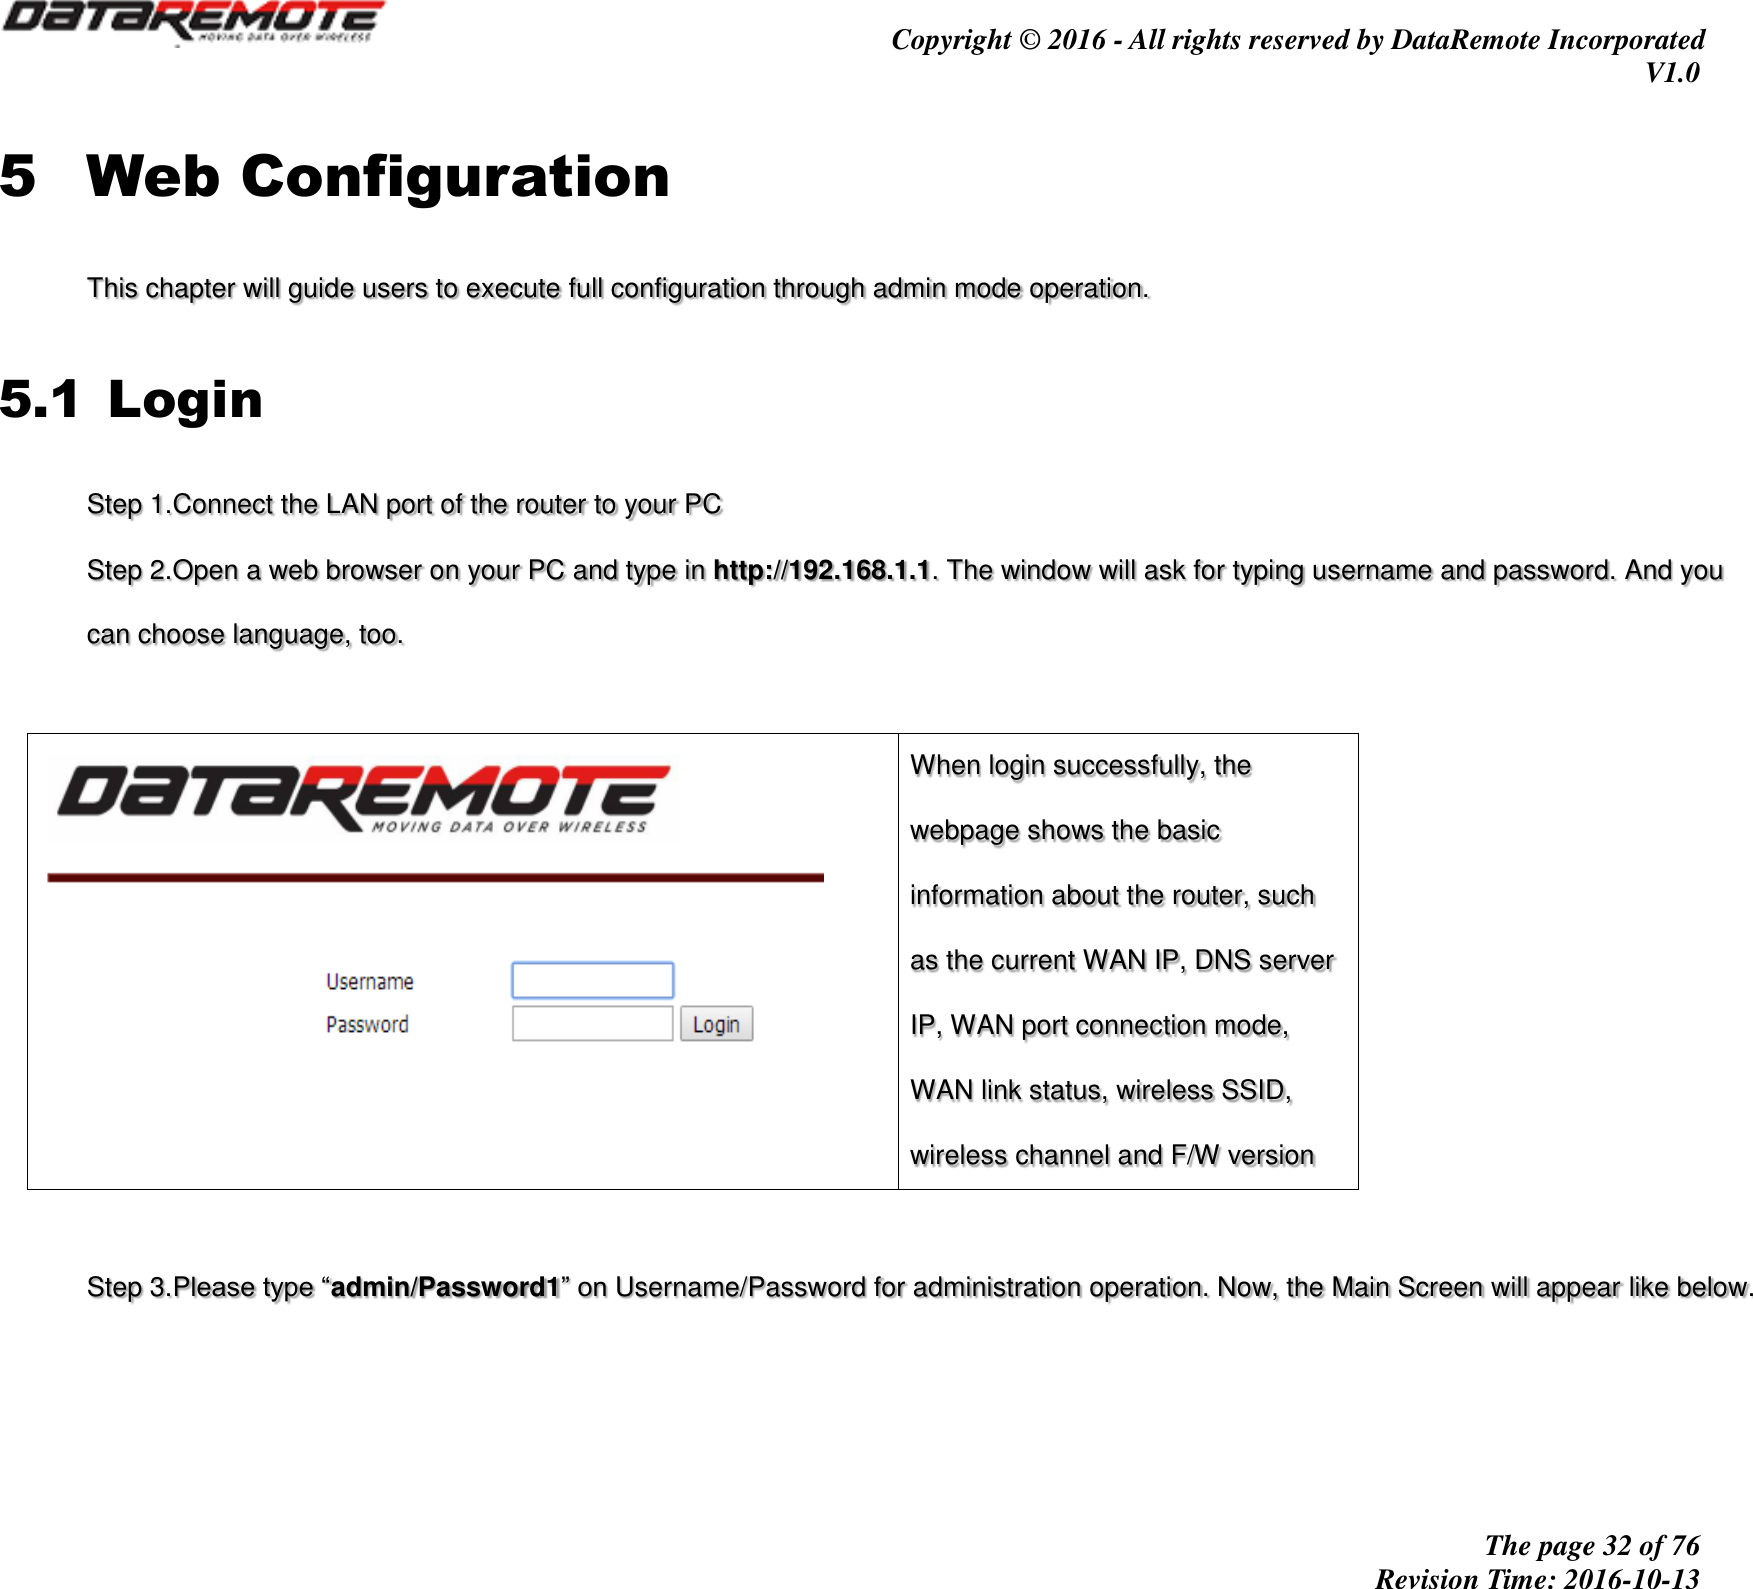                                         Copyright © 2016 - All rights reserved by DataRemote Incorporated V1.0                                                          The page 32 of 76 Revision Time: 2016-10-13     5 Web Configuration This chapter will guide users to execute full configuration through admin mode operation. 5.1 Login Step 1.Connect the LAN port of the router to your PC Step 2.Open a web browser on your PC and type in http://192.168.1.1. The window will ask for typing username and password. And you can choose language, too.   When login successfully, the webpage shows the basic information about the router, such as the current WAN IP, DNS server IP, WAN port connection mode, WAN link status, wireless SSID, wireless channel and F/W version  Step 3.Please type “admin/Password1” on Username/Password for administration operation. Now, the Main Screen will appear like below.   